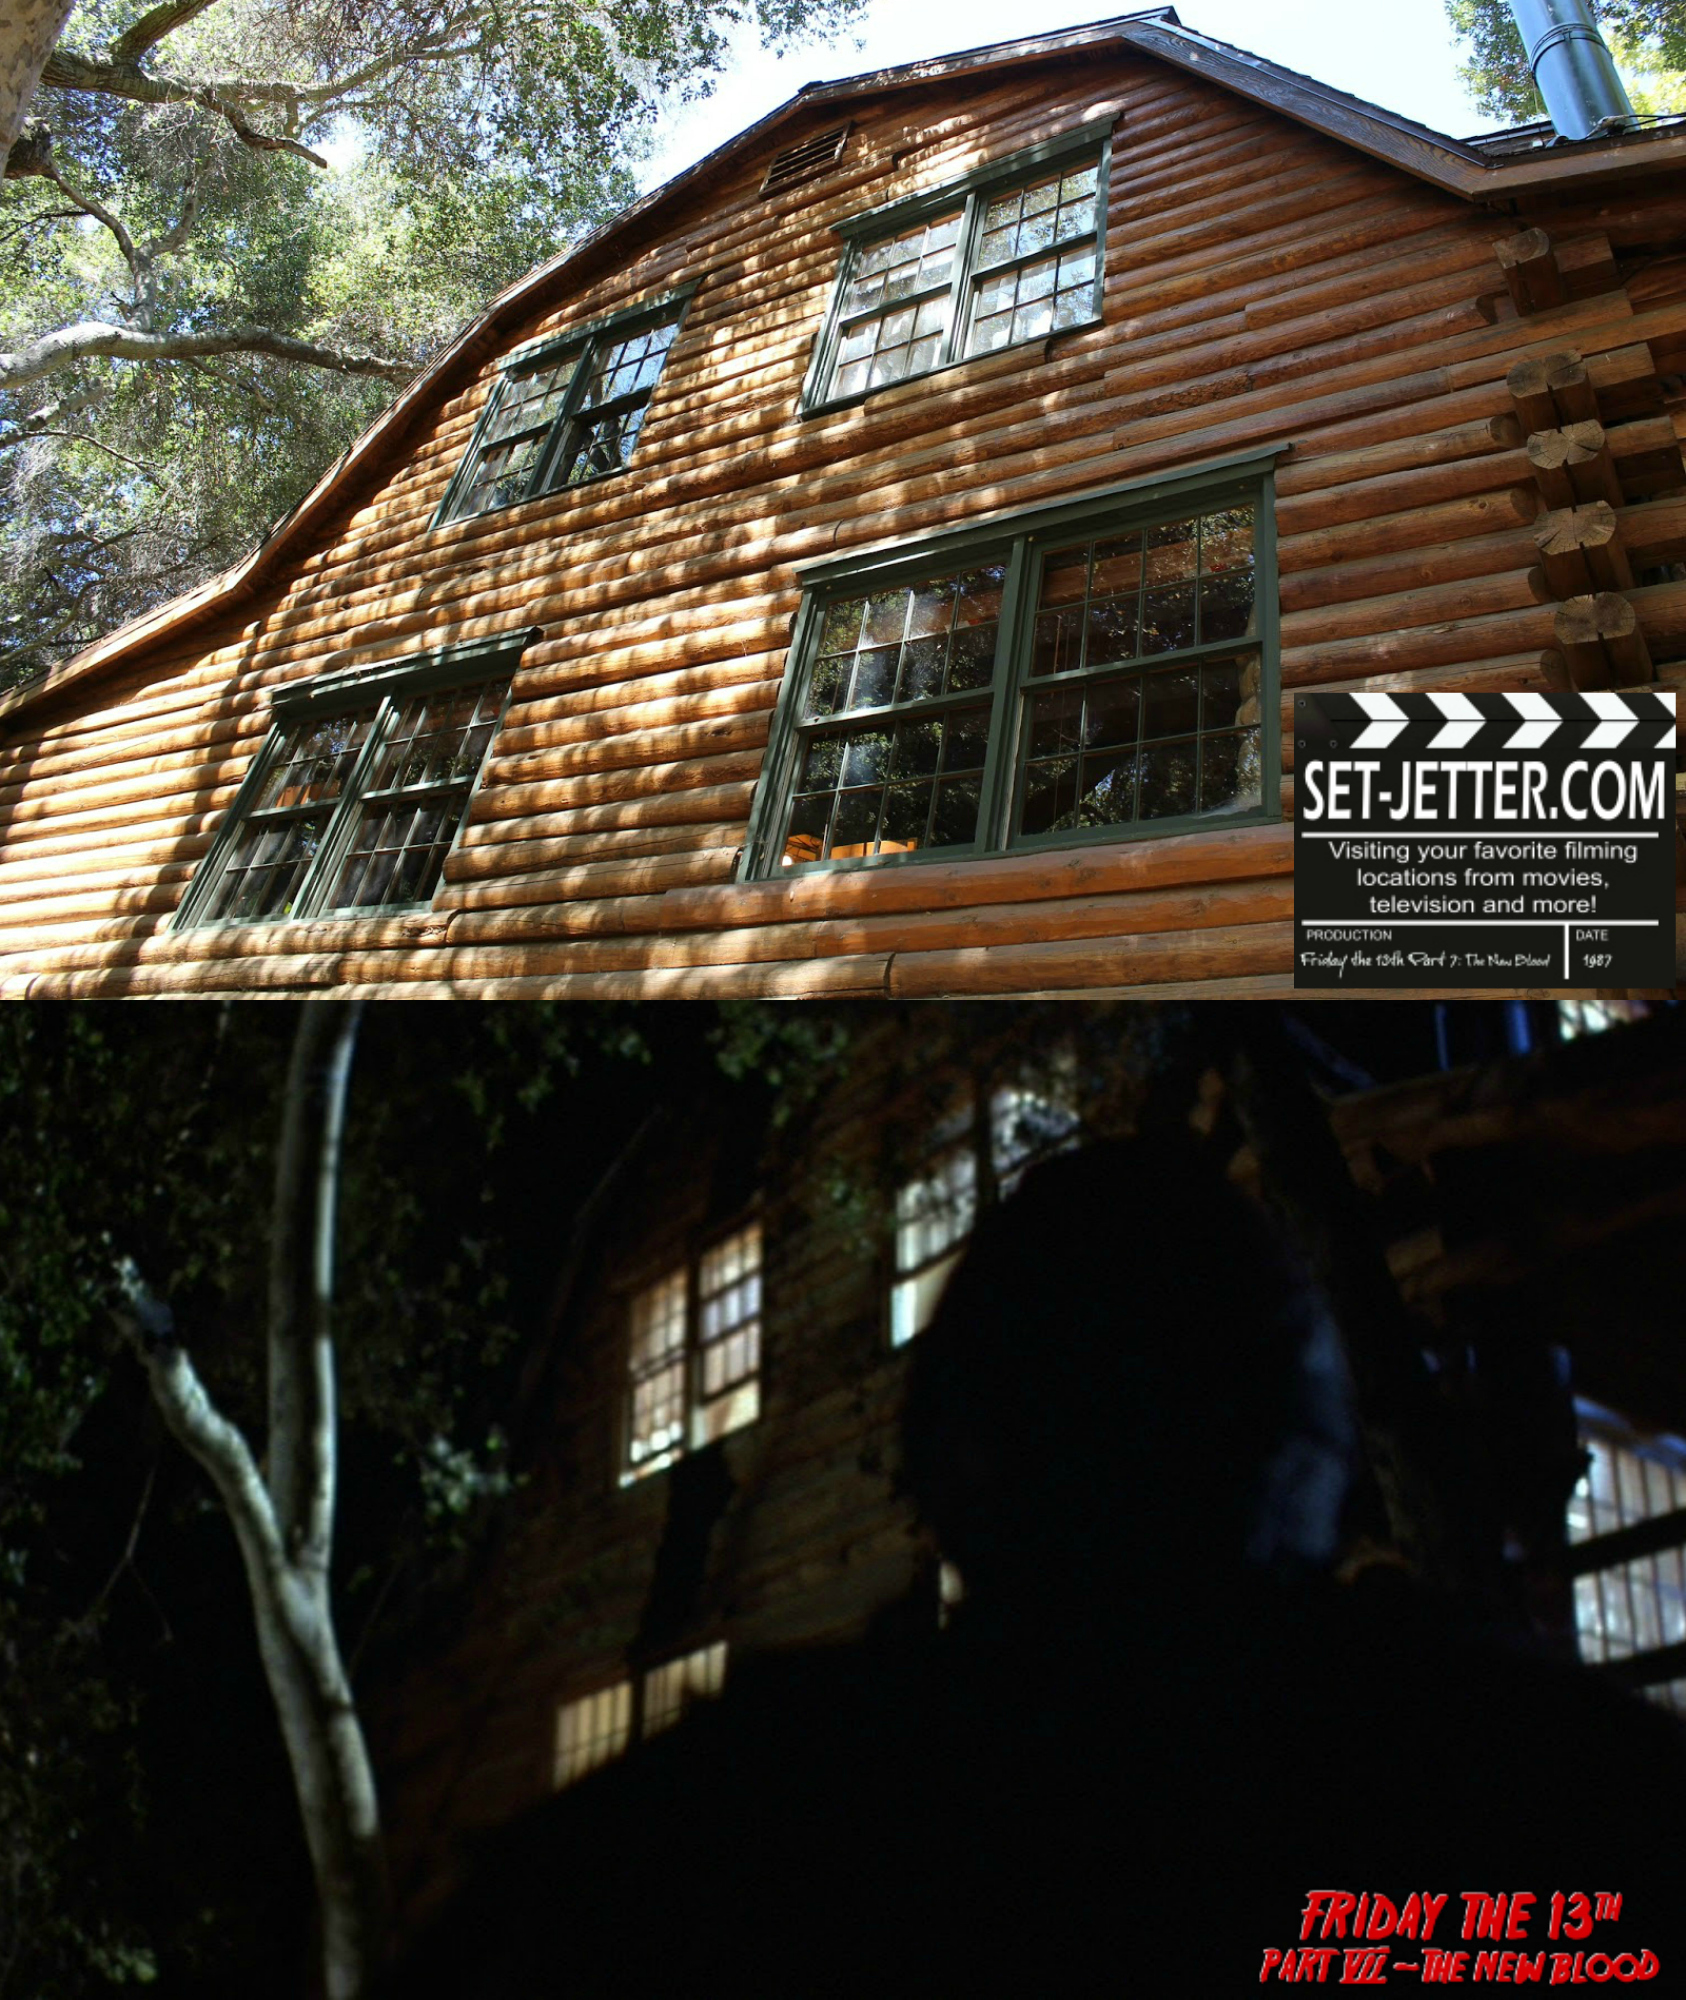 Friday the 13th Part VII comparison 01.jpg